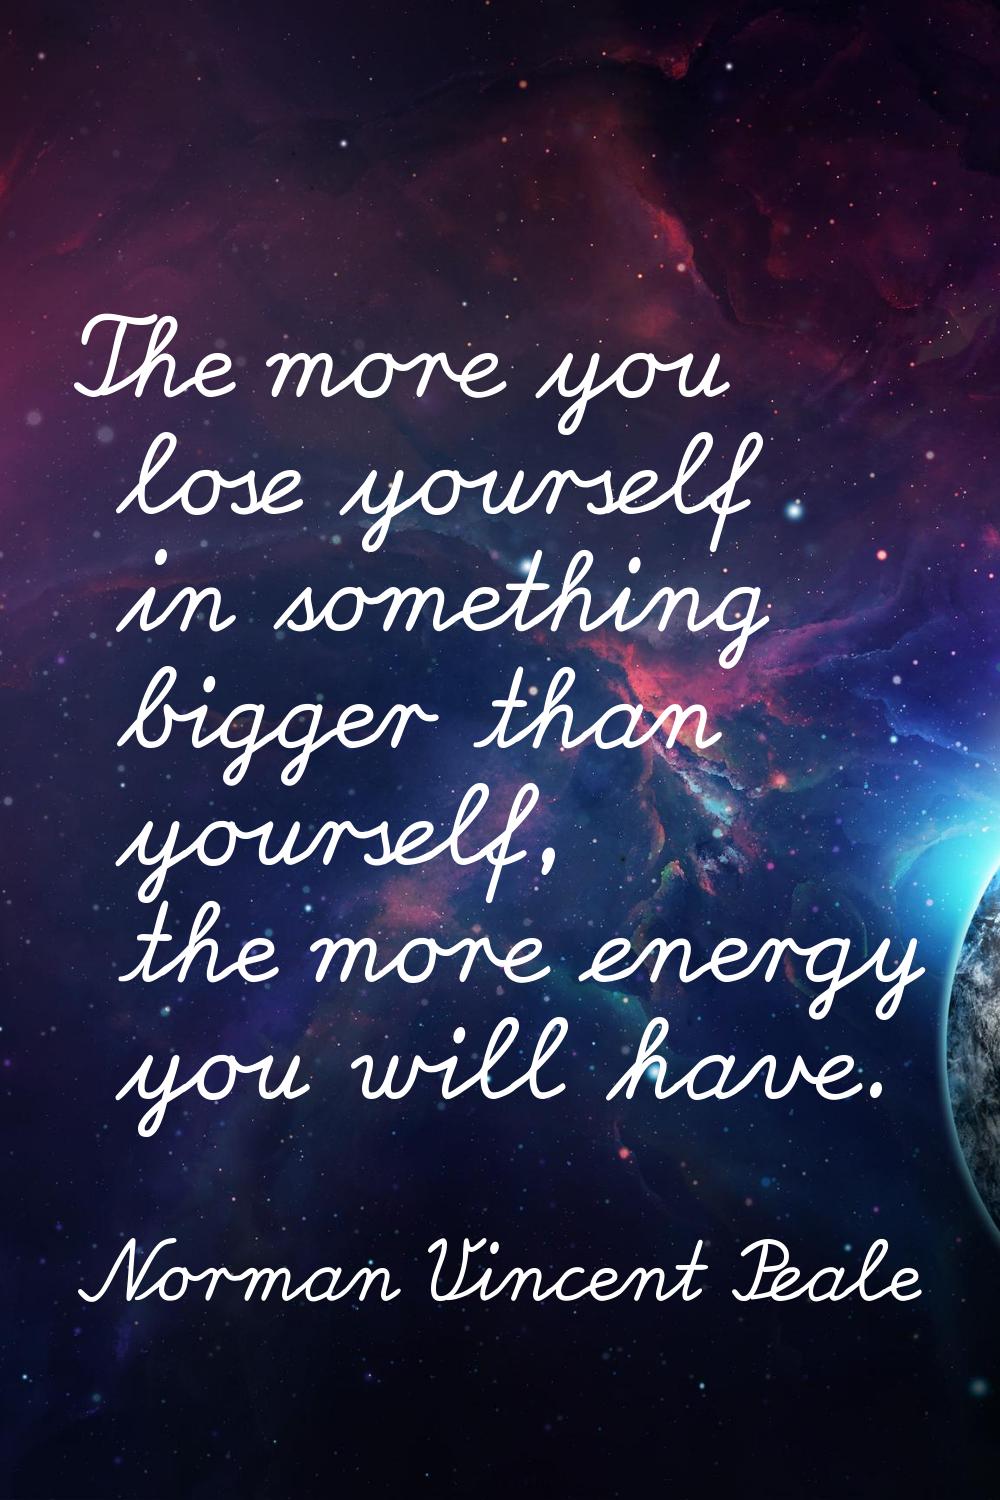 The more you lose yourself in something bigger than yourself, the more energy you will have.